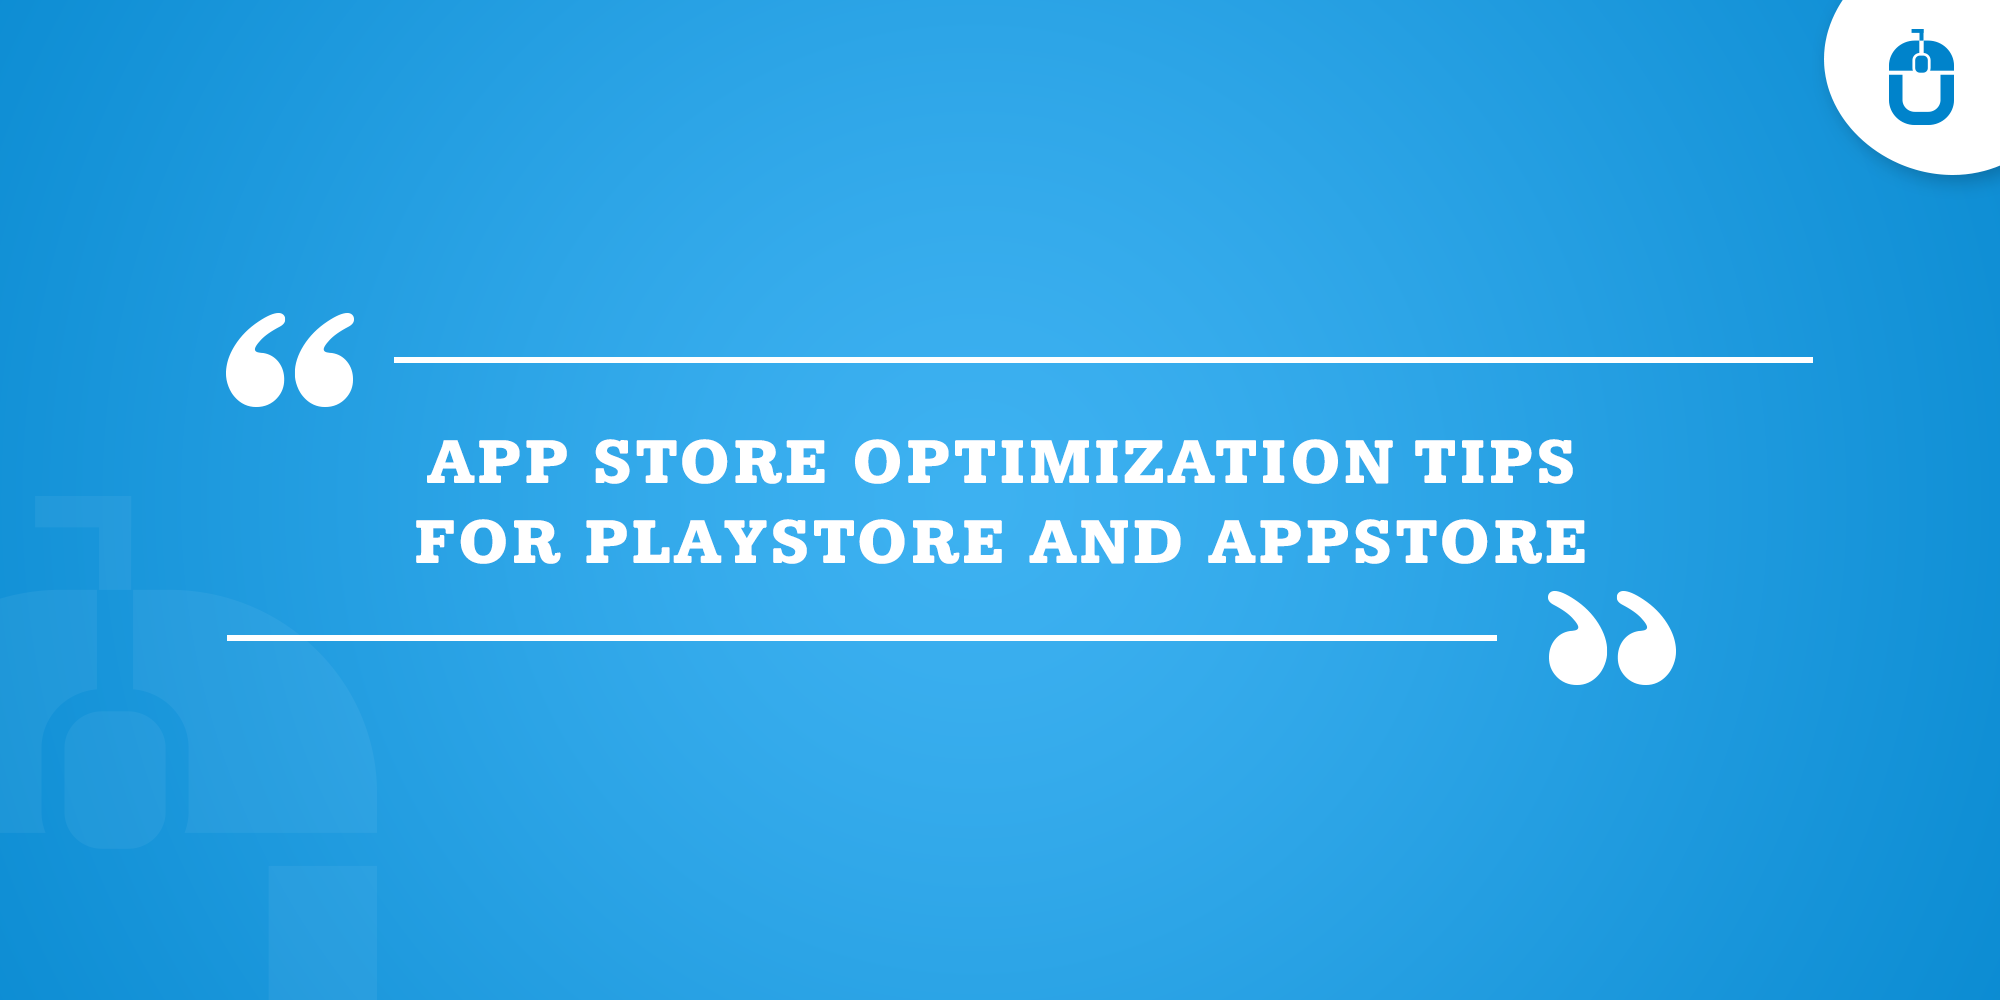 App Store Optimization Tips For Playstore And Appstore